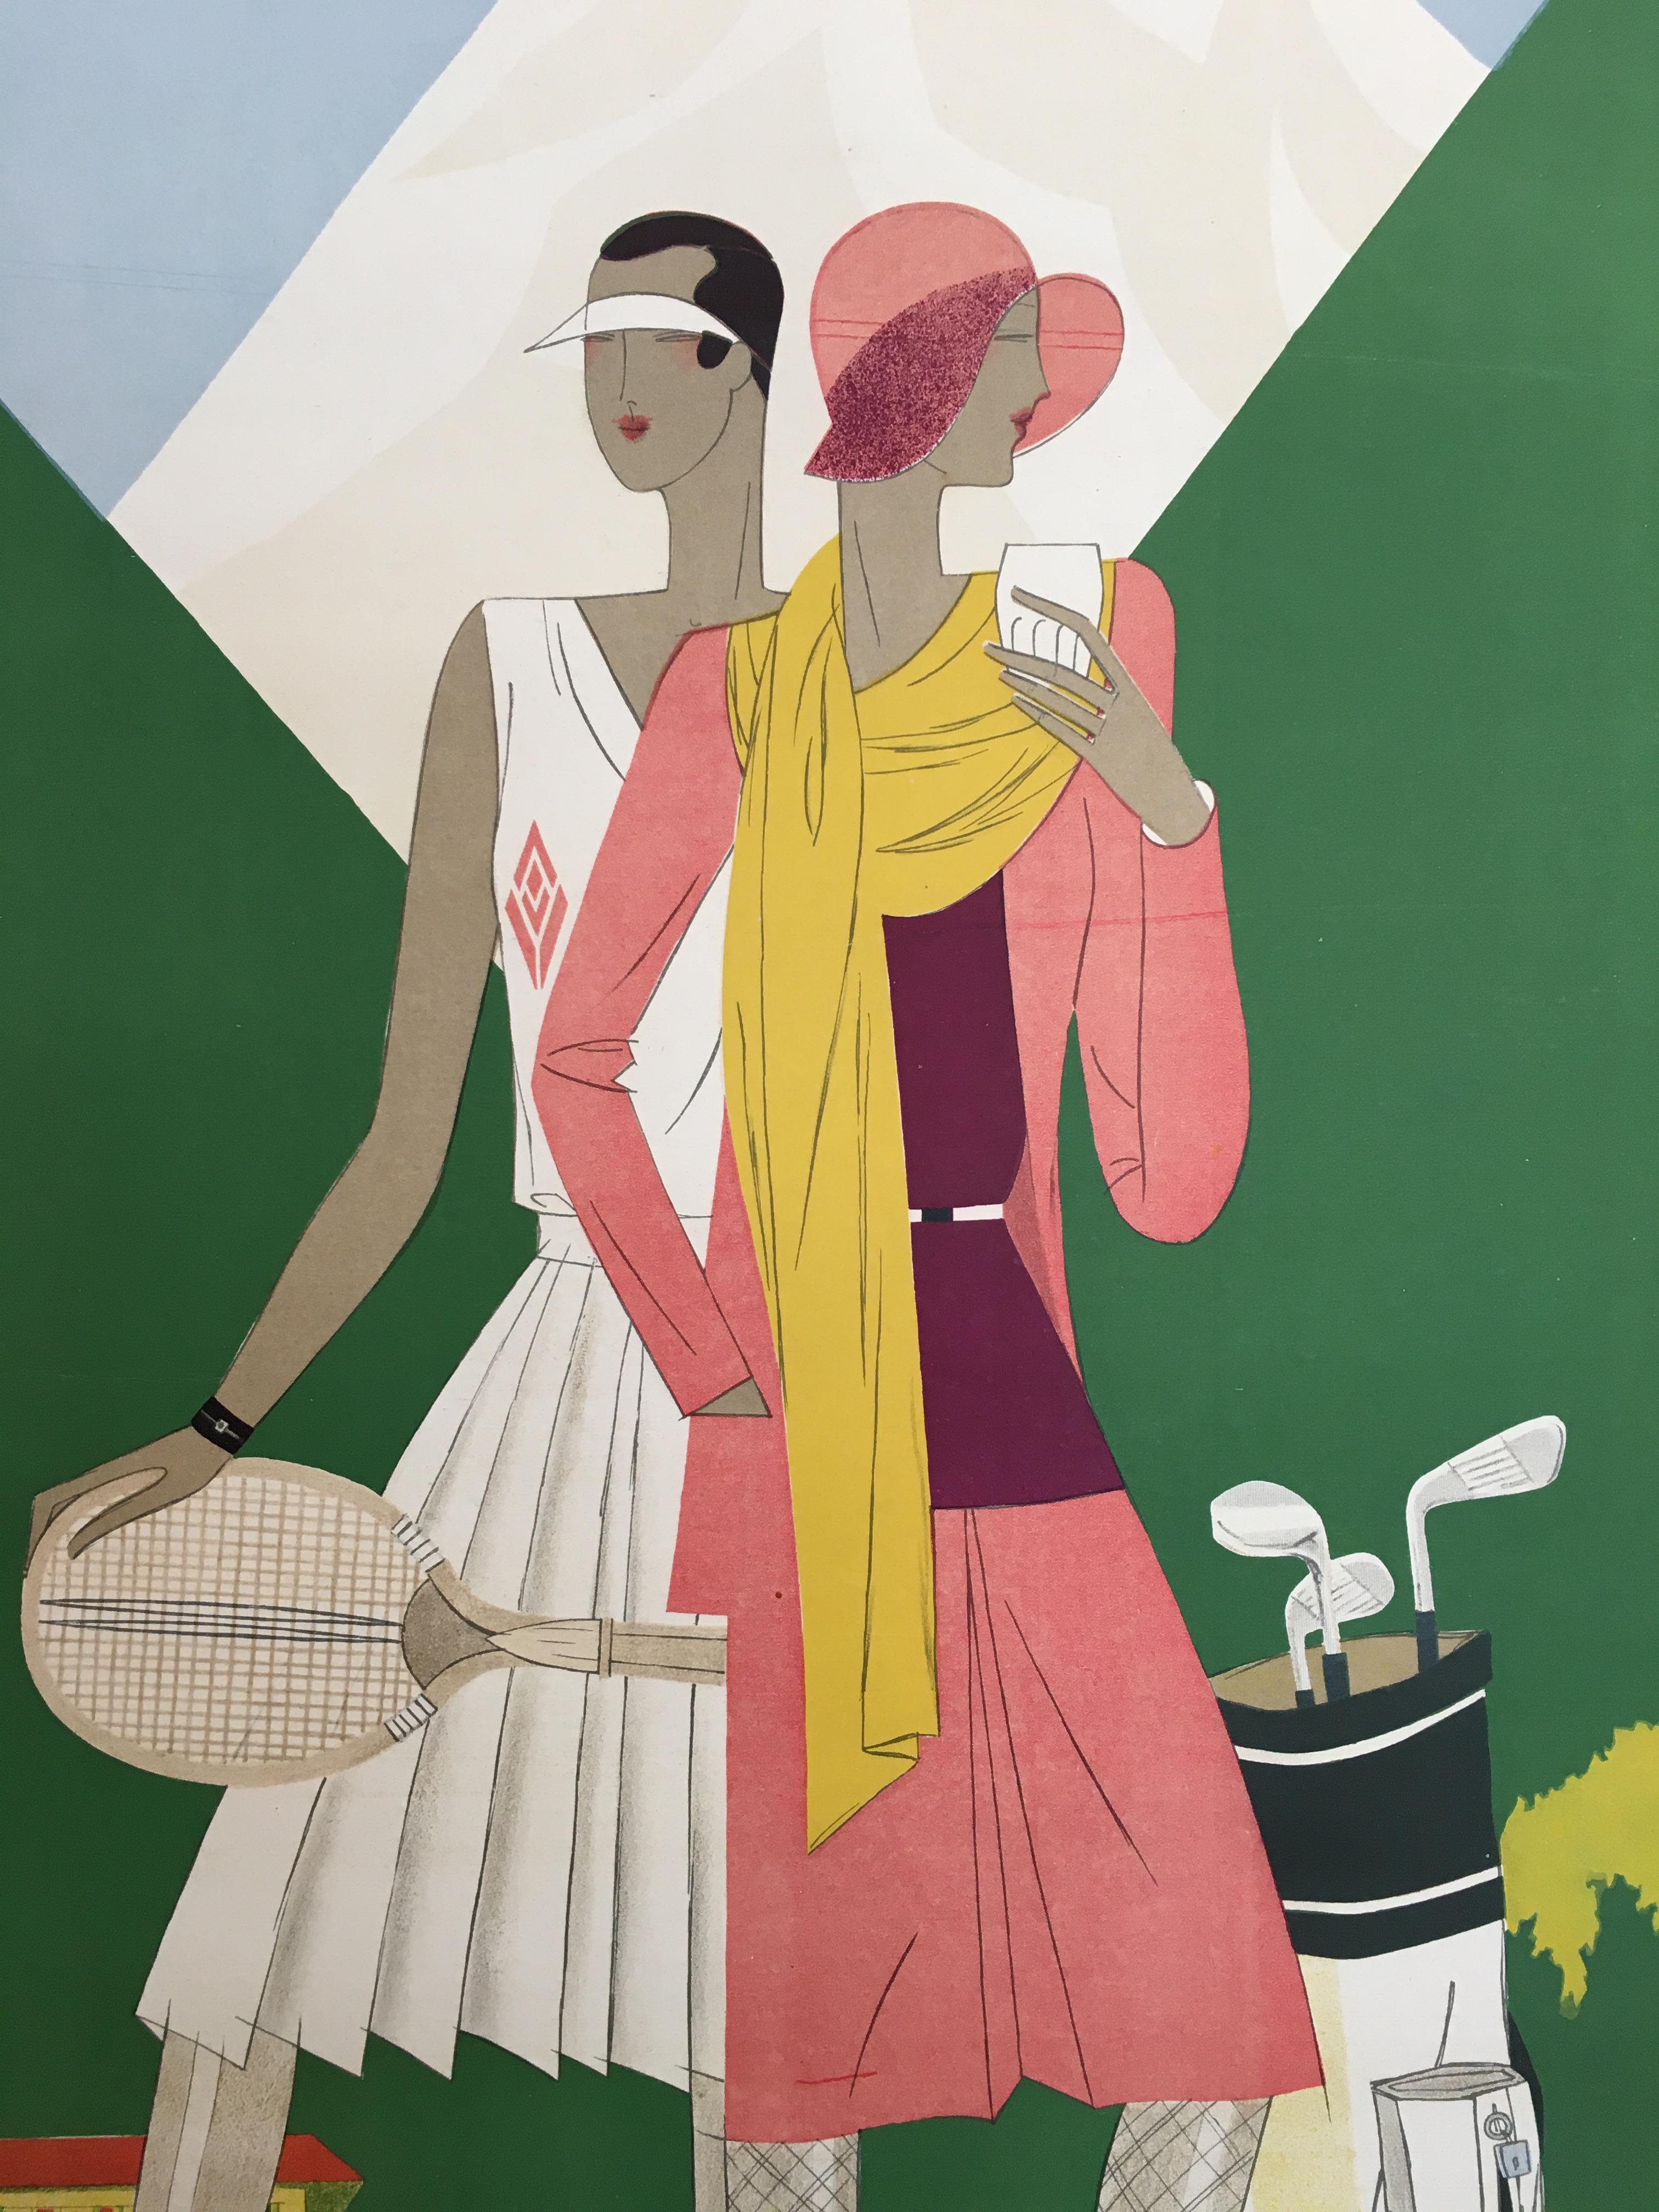 Original vintage French Art Deco brides poster 'Les Bains' By Leon Benigni 1929

Brides-les-Bains is a commune in the Auvergne-Rhône-Alpes region in south-eastern France. It was once an Olympic Village for the 1992 Winter Olympics, based in